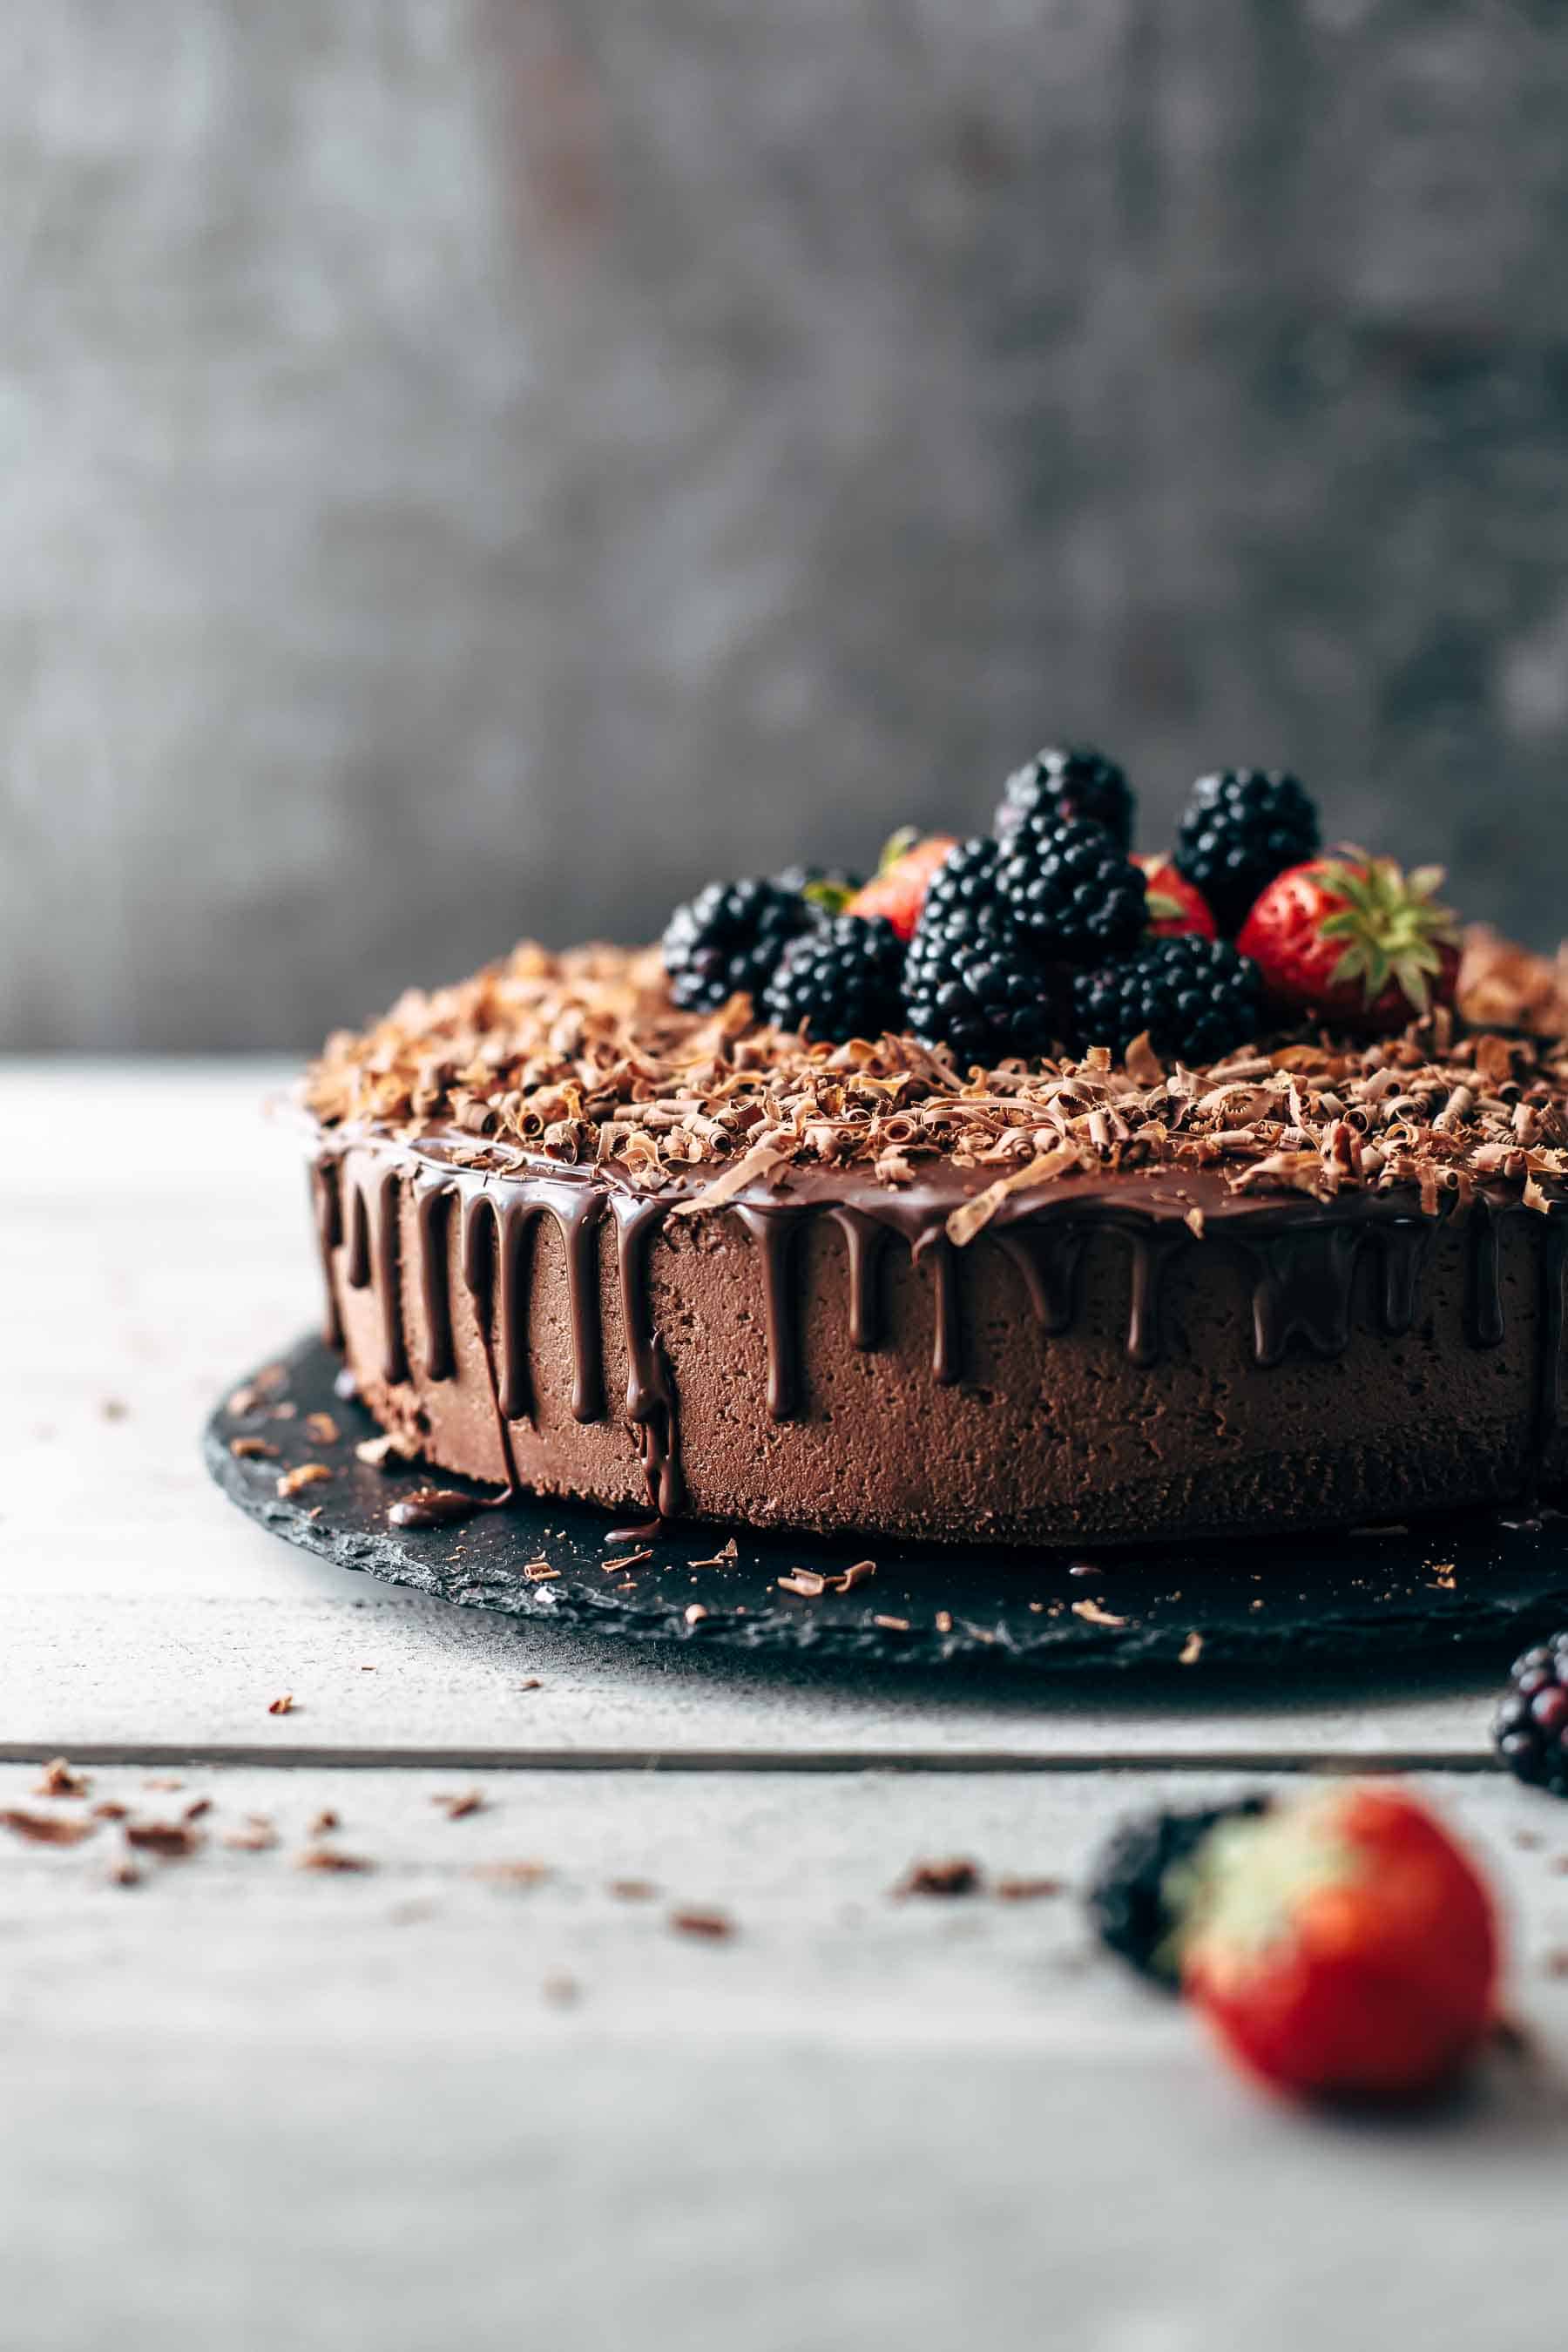 chocolate cake with ganache dripping down the sides, topped with berries and chocolate shavings